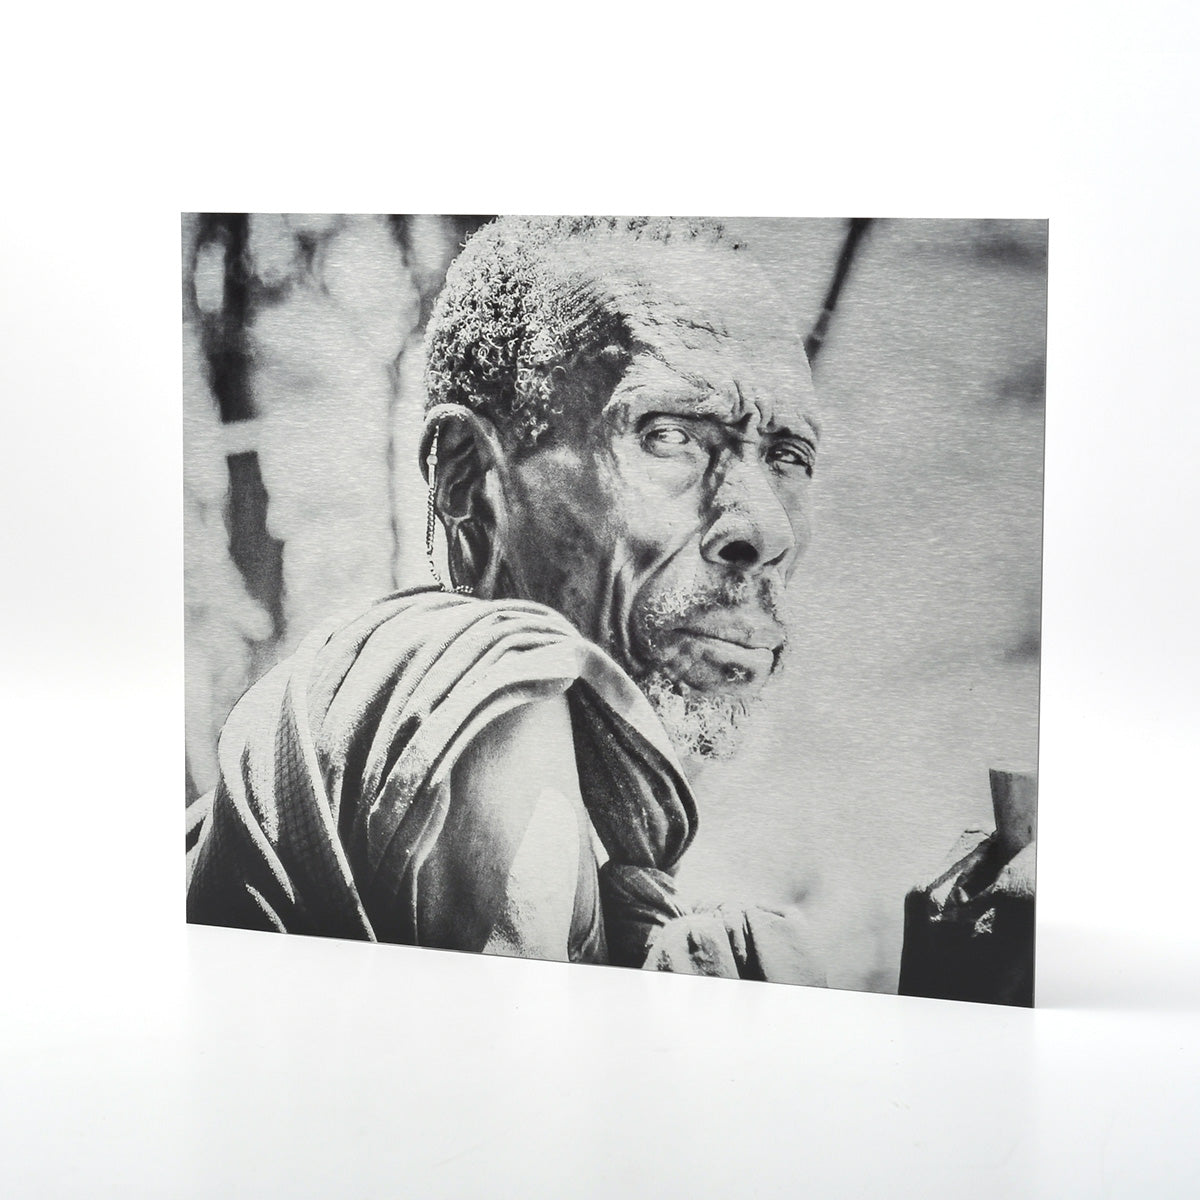 Photo of a Man from the Maasai Tribe in Tanzania Printed Directly onto Metal